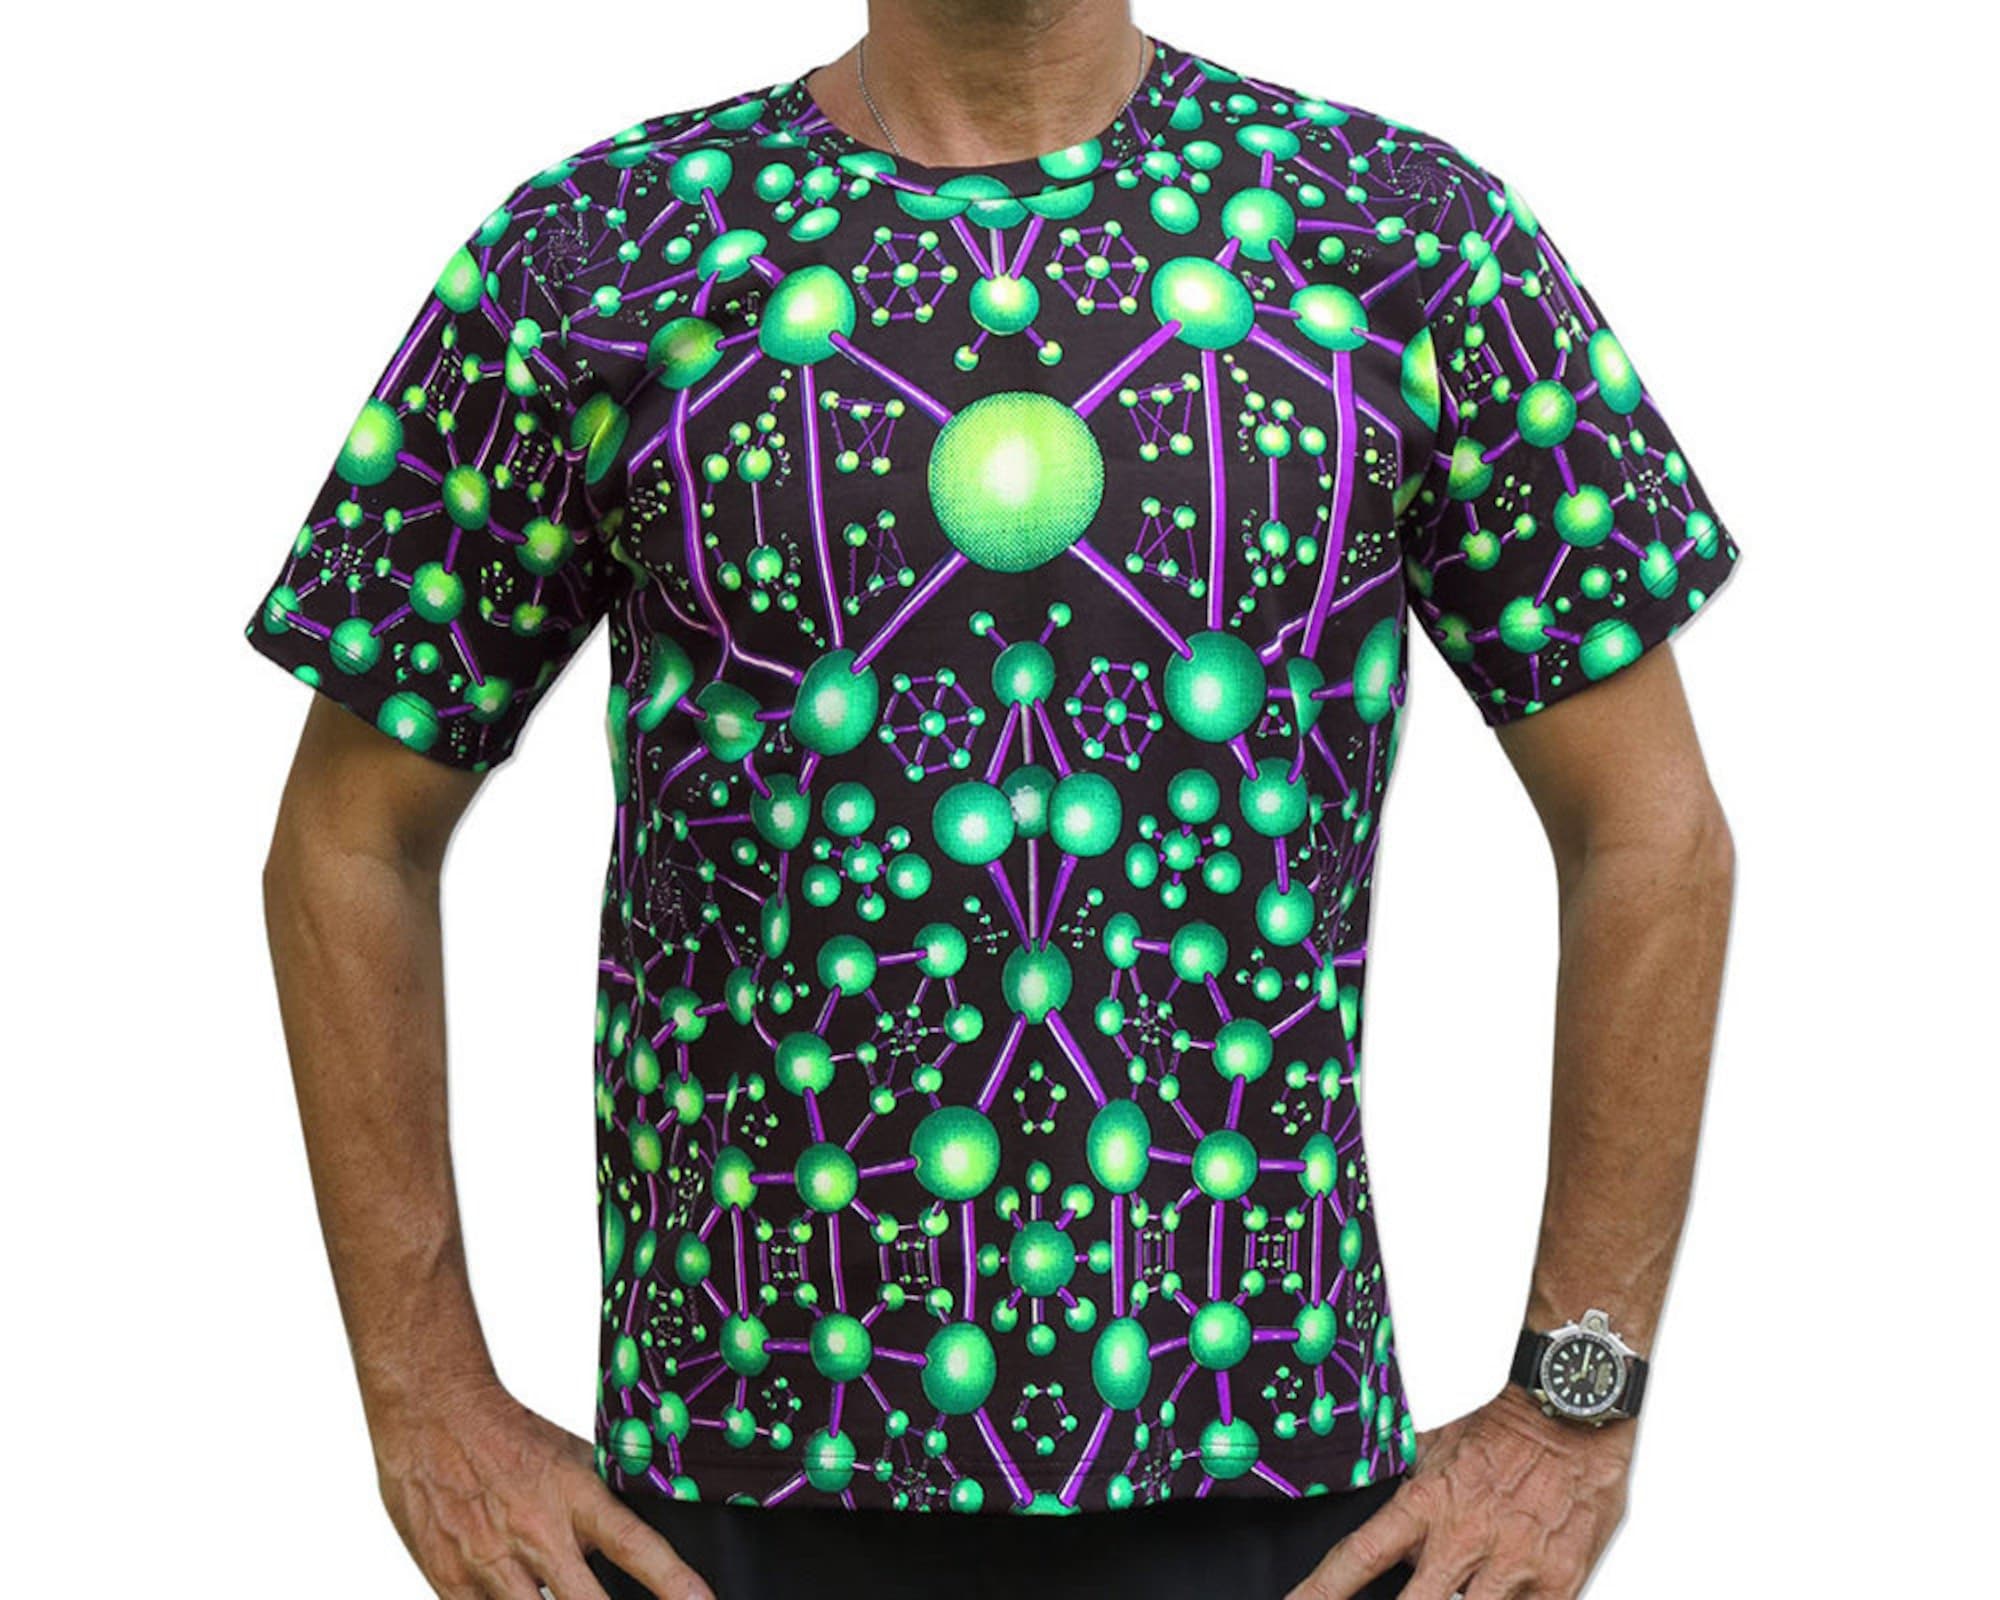 Discover Psychedelic t shirt 'Alien Molecule'. Goa clothing, Psy trance festival T shirt, UV active Rave wear, rave T shirt, Psychedelic clothing